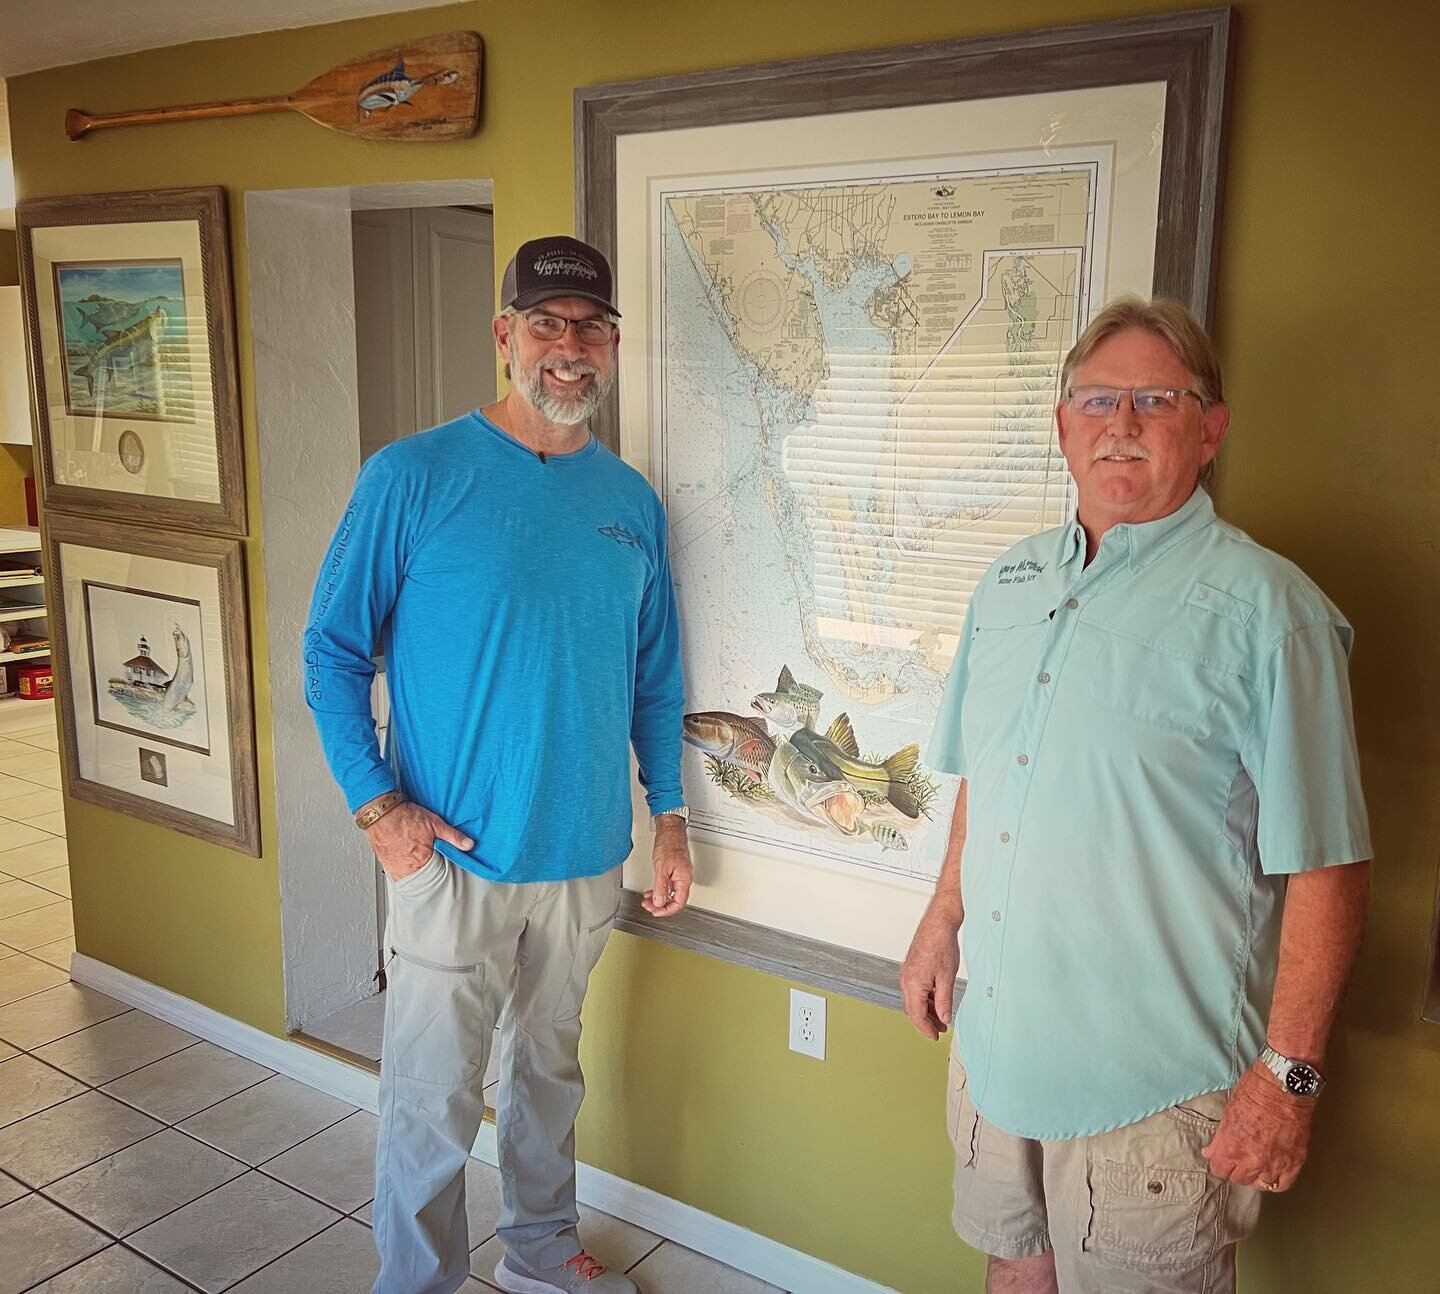 What a visit today for Cameron and I to sit down and listen to Artist Steve Whitlock&rsquo;s life story. Steve&rsquo;s had some peaks and valleys but he came out on top! #newfilmproject
.
.
#wildlifeartist #gamefish #stevewhitlockart #captcarichardso